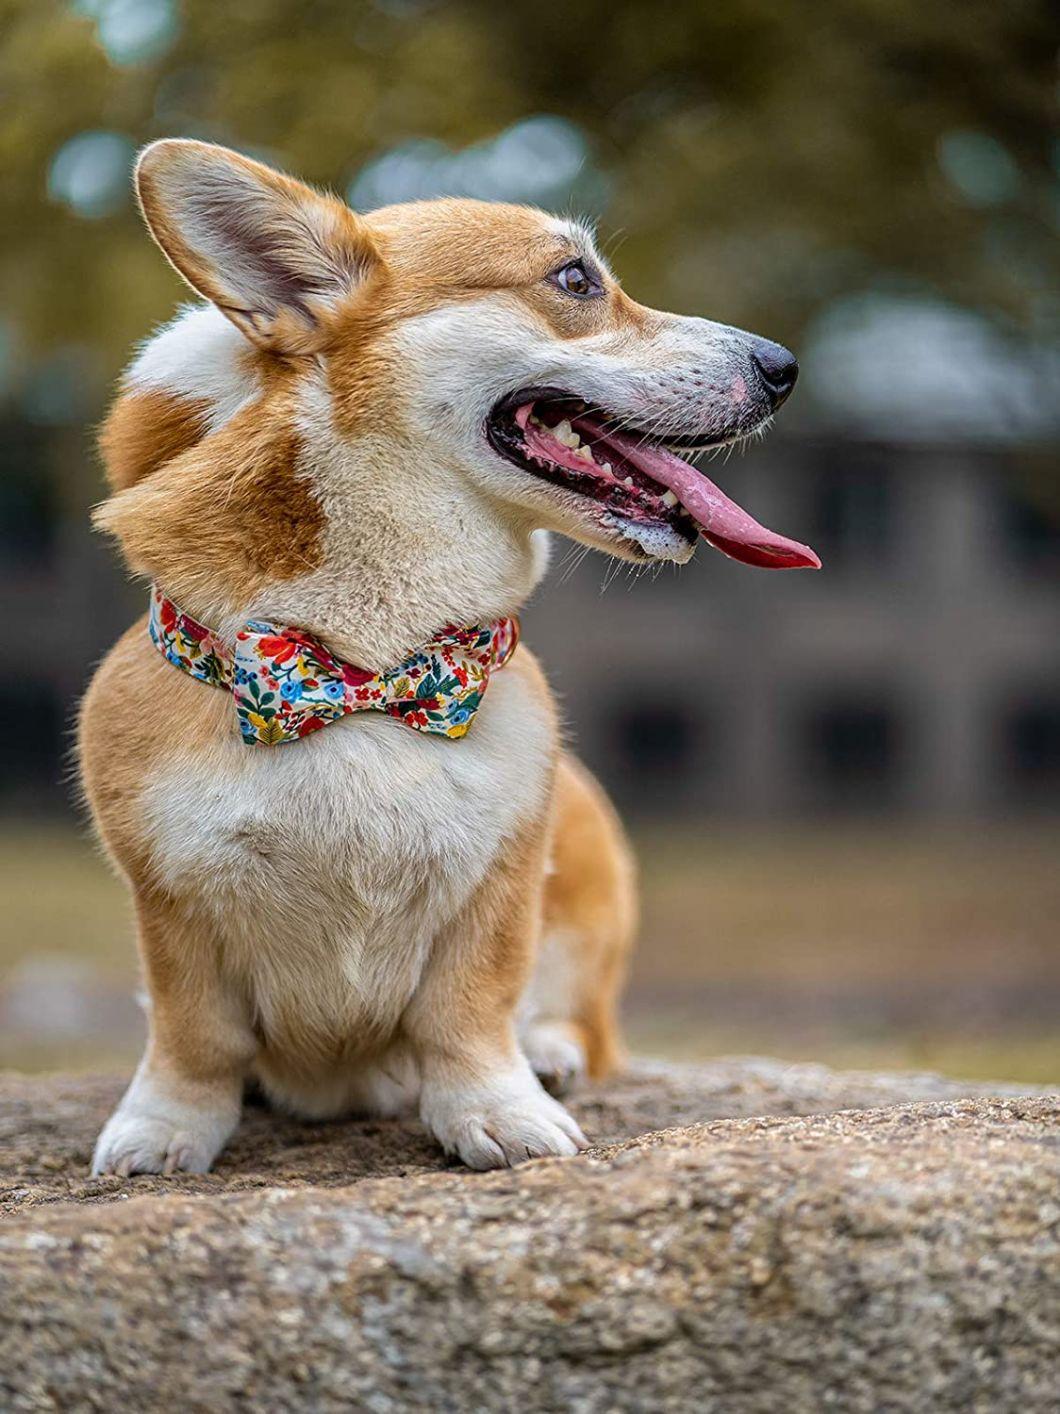 Adjustable Pattern Dog Collars for Small Medium Large Dogs and Cats